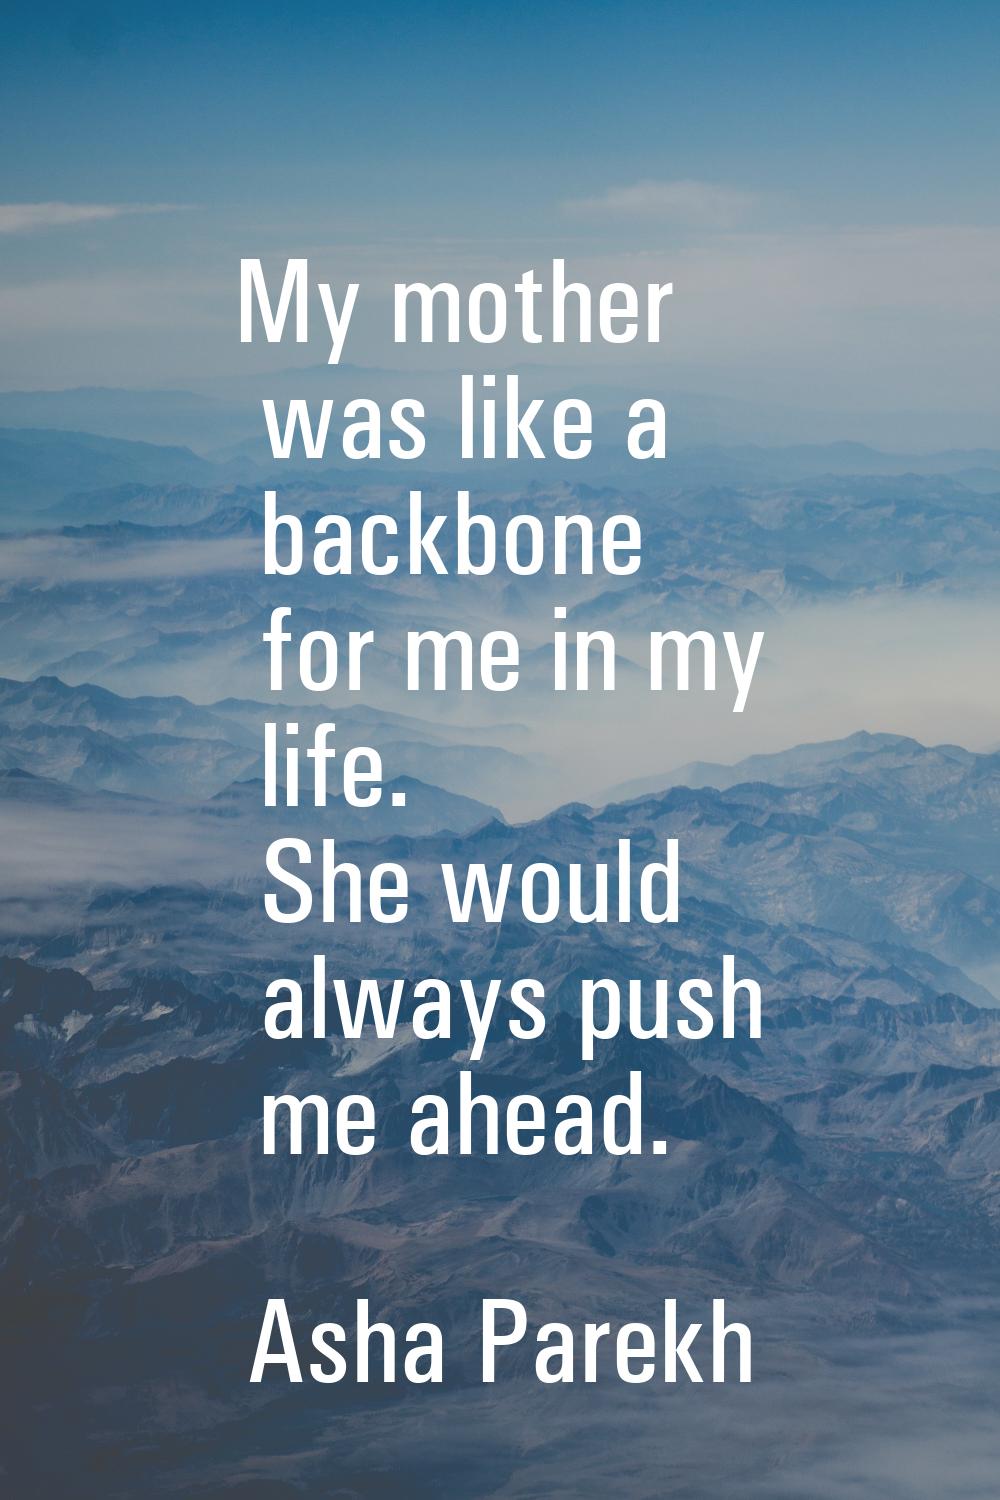 My mother was like a backbone for me in my life. She would always push me ahead.